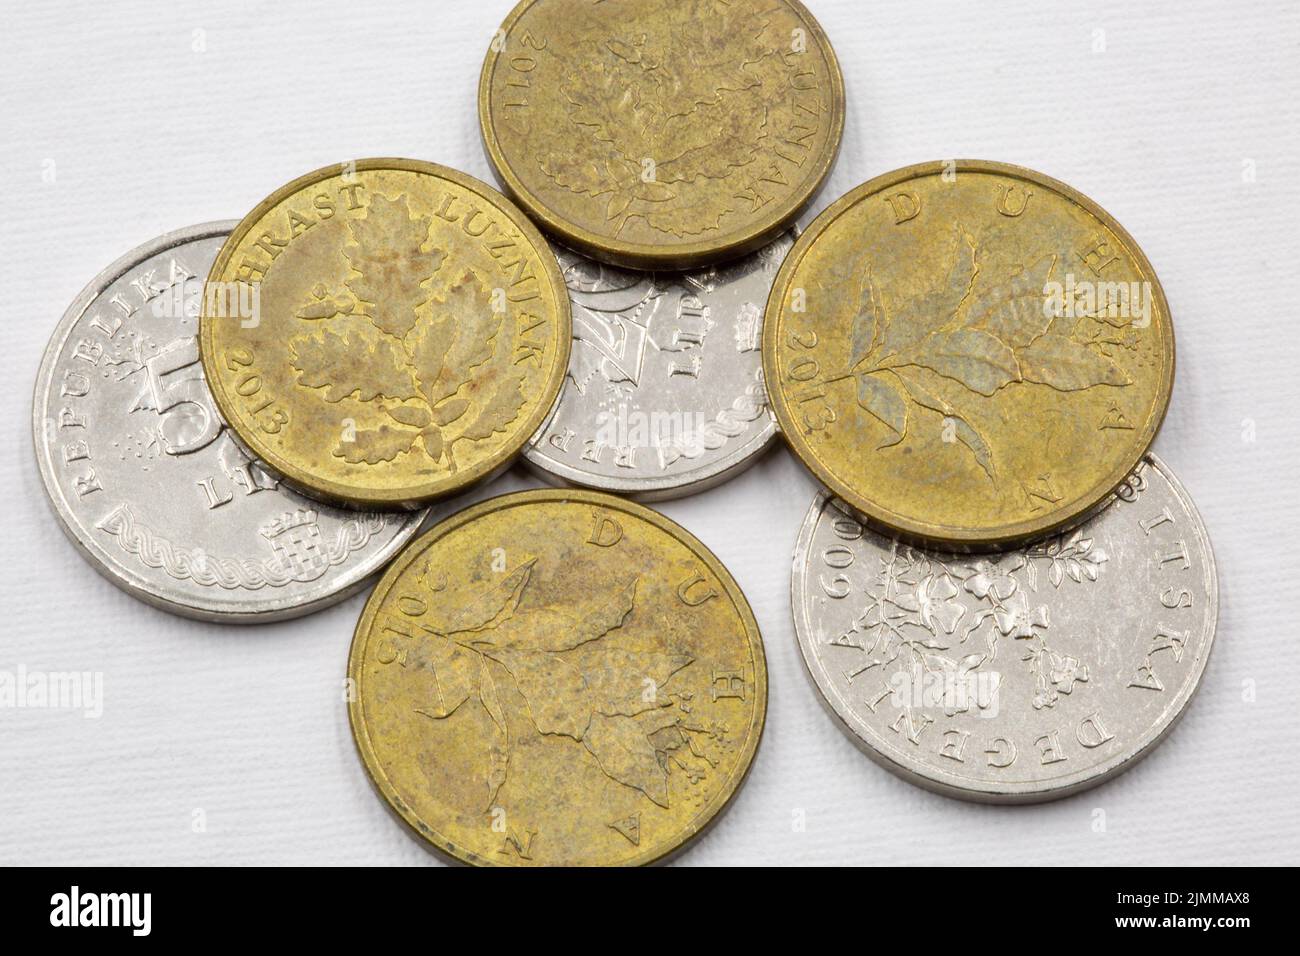 Used Croatian coins closeup against white Stock Photo